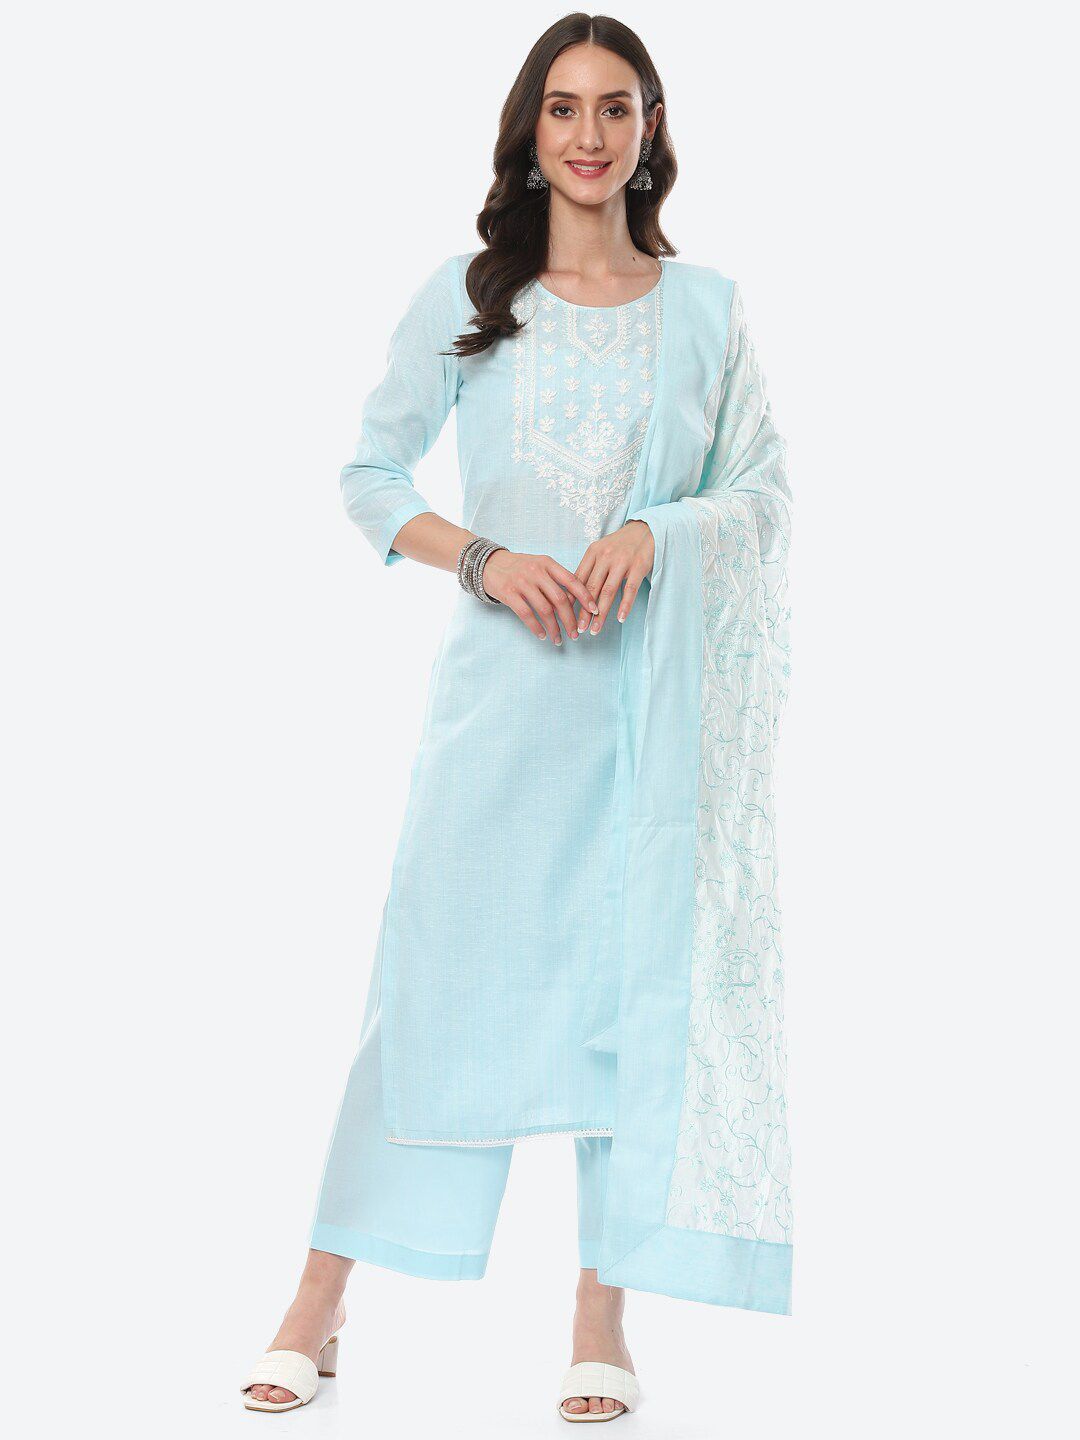 Meena Bazaar Blue & White Embroidered Pure Cotton Unstitched Dress Material Price in India